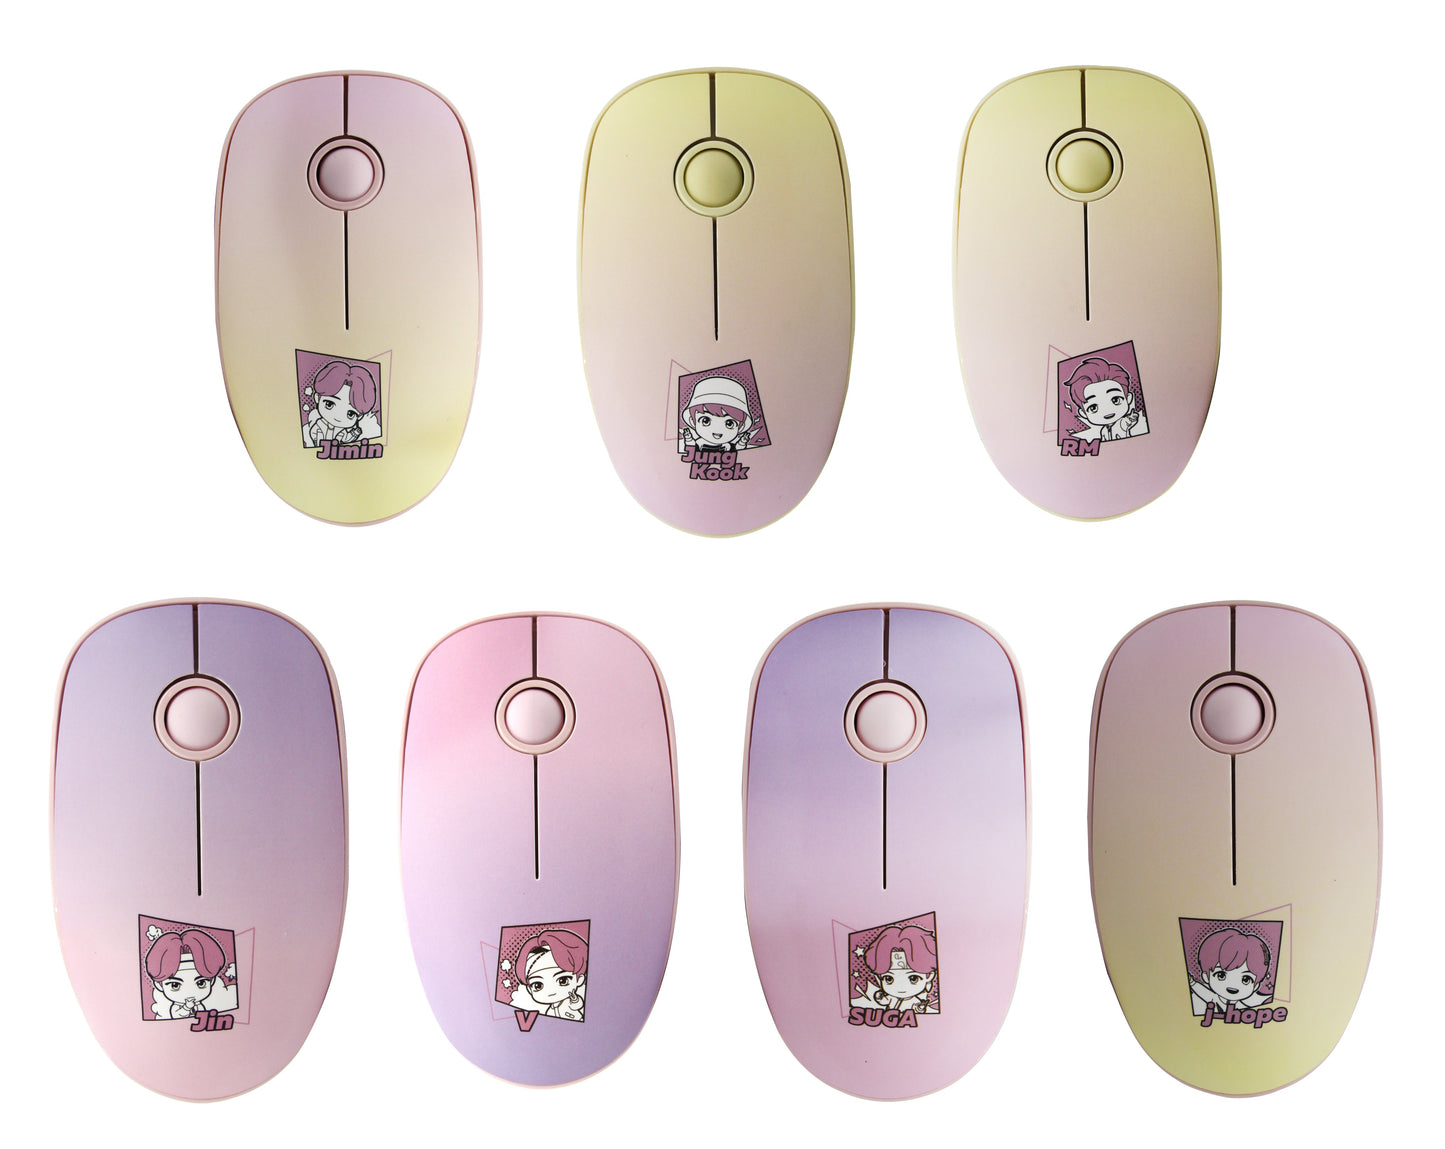 BTS Tiny Tan Bangtan Magic Door Wireless Silent Mouse, All Seven BTS Members in Their Own Cute Design